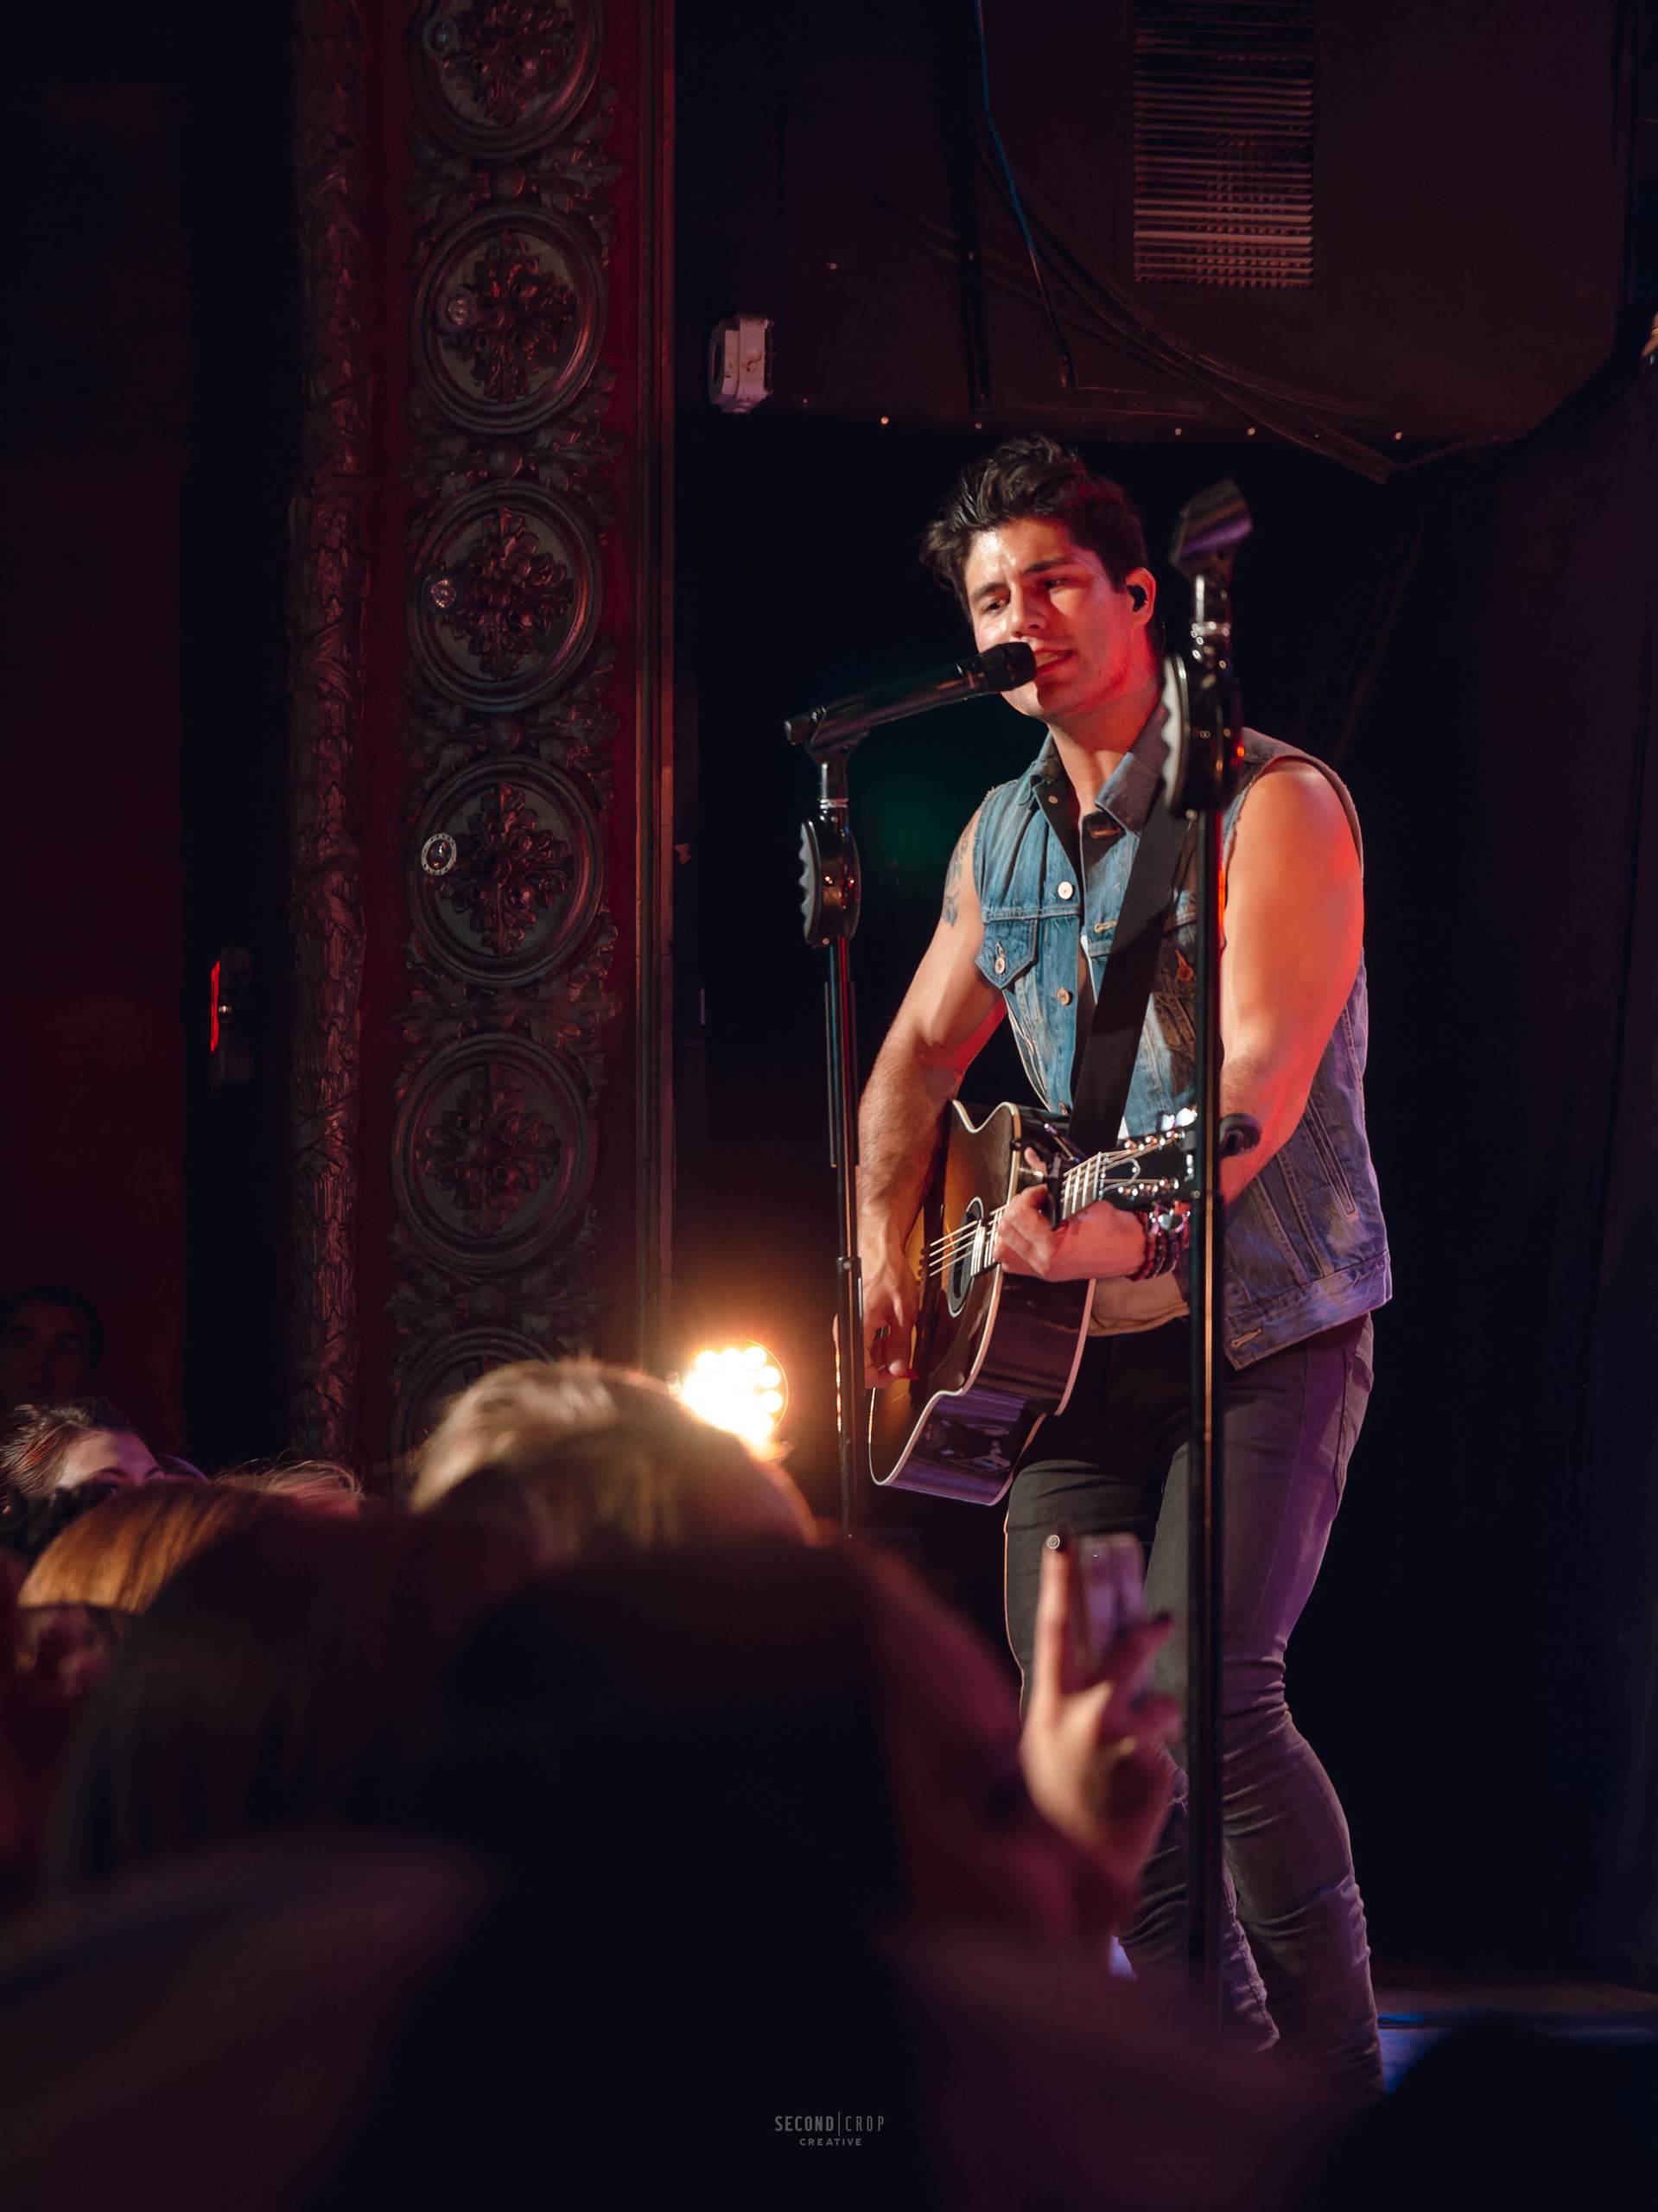 Dan & Shay performing at The Majestic in Madison, WI on October 10th, 2014, photography by Ross Harried for Second Crop Music